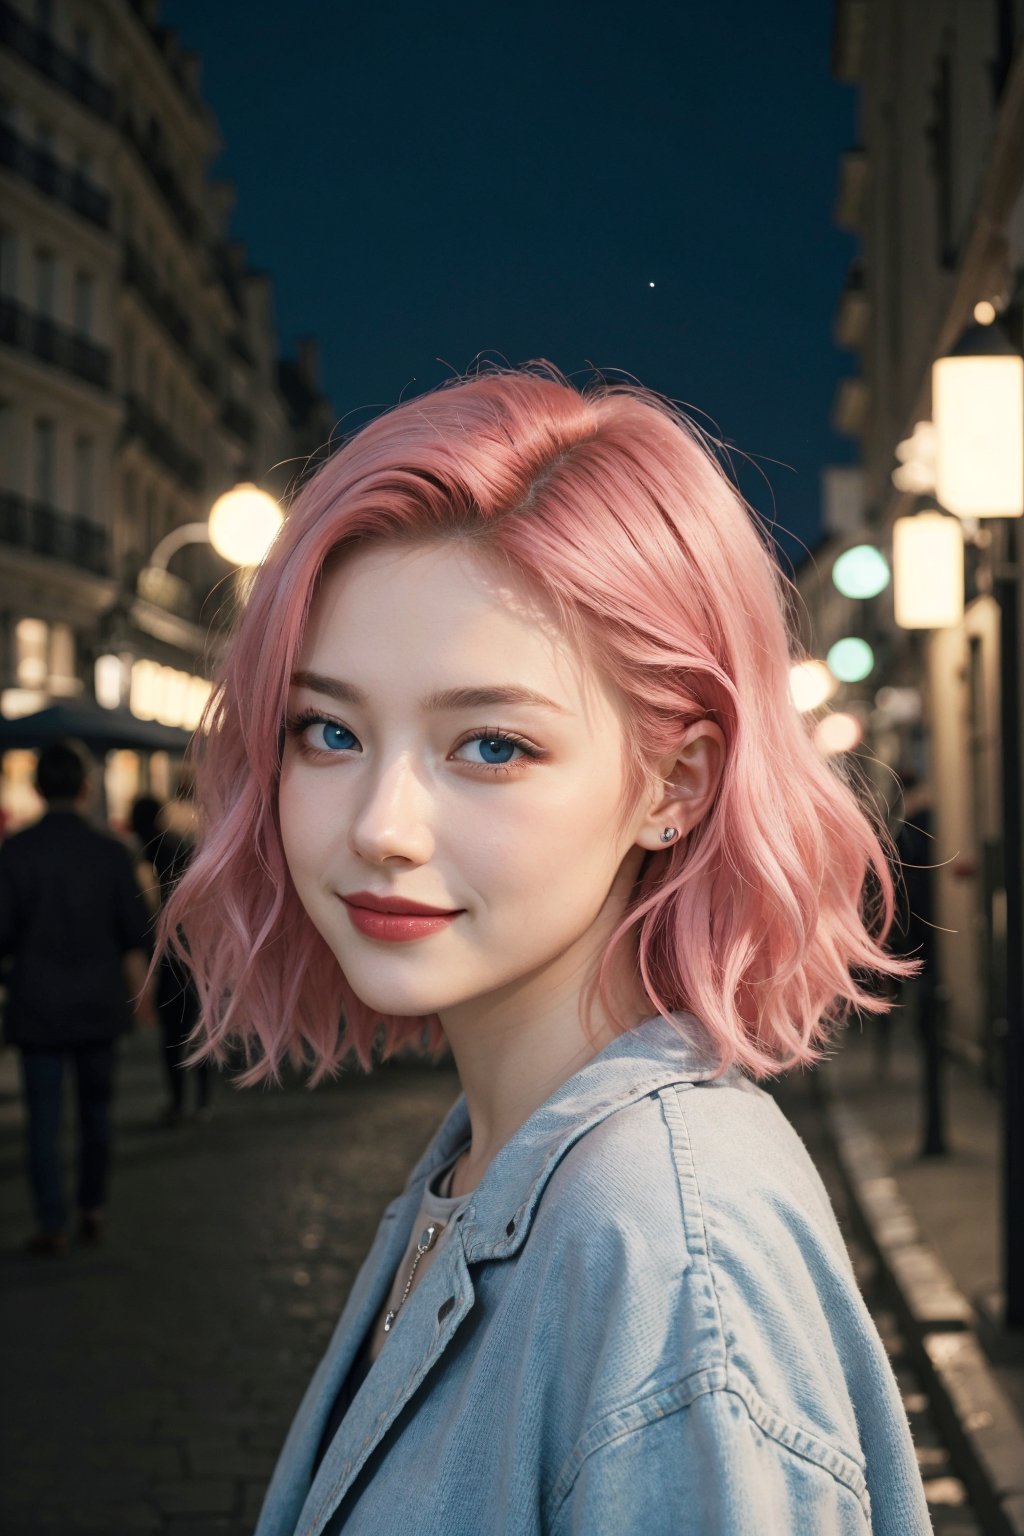 A beautiful Ukranian model, happpy face, cute, sharp light blue eyes, sharp face, highly detailed, short wavy black and pink hair, in paris, nighttime, enjoying, modern clothes